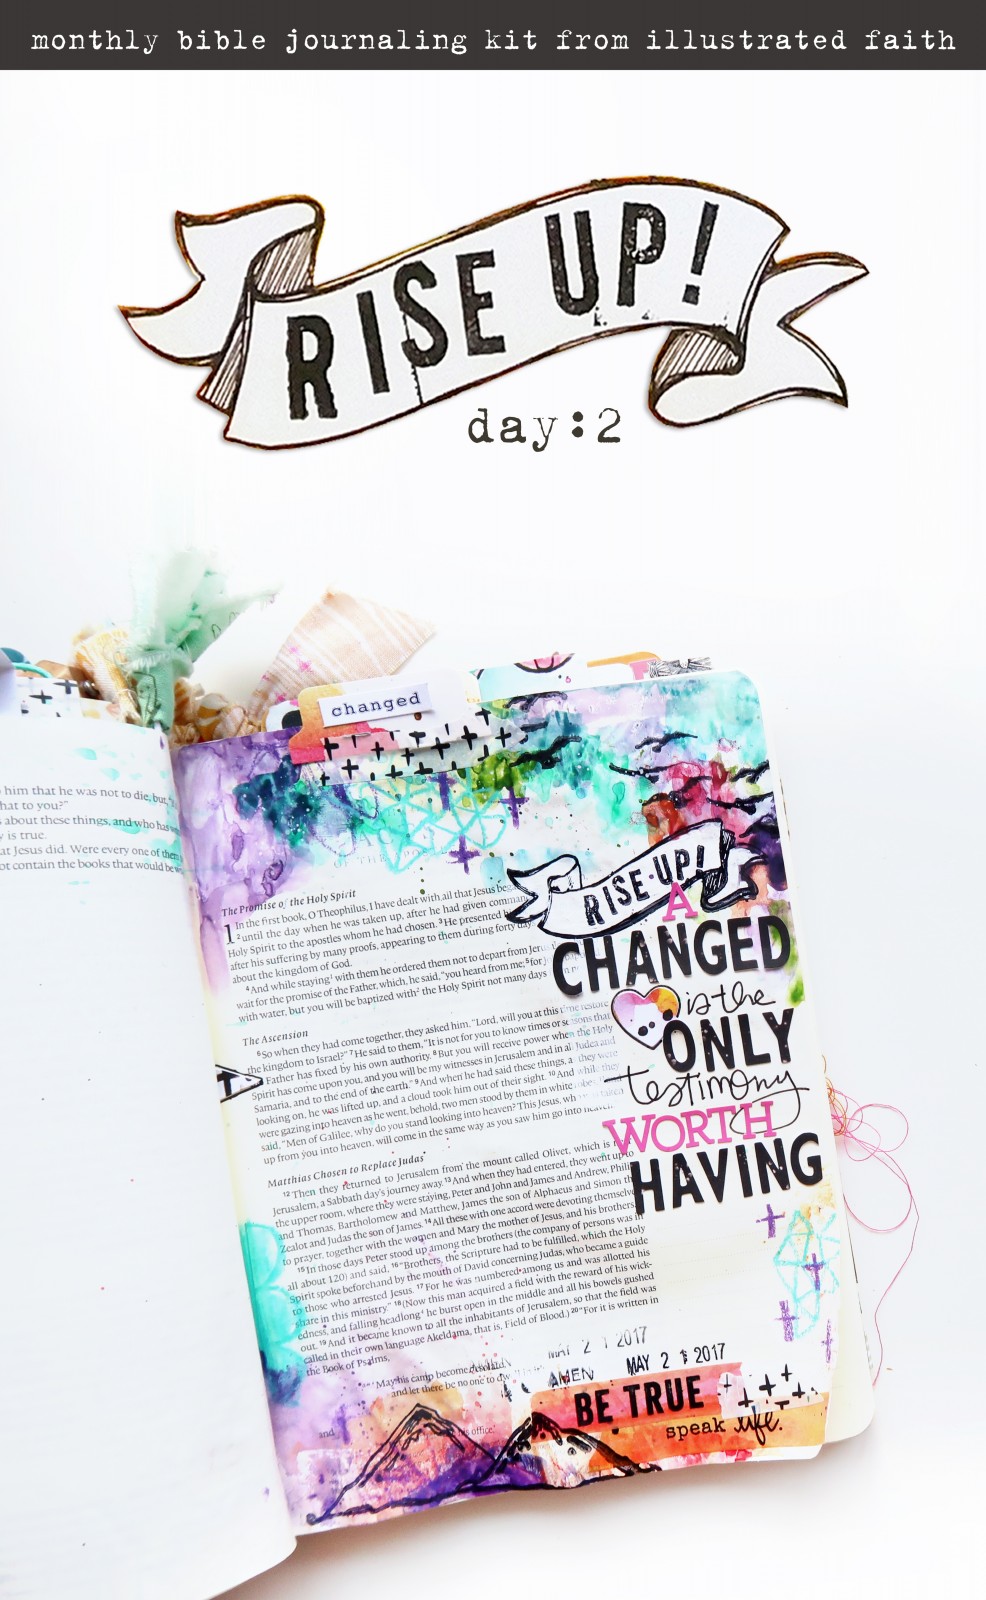 New Bible Journaling Kit  Rise Up Process Video! - Illustrated Faith